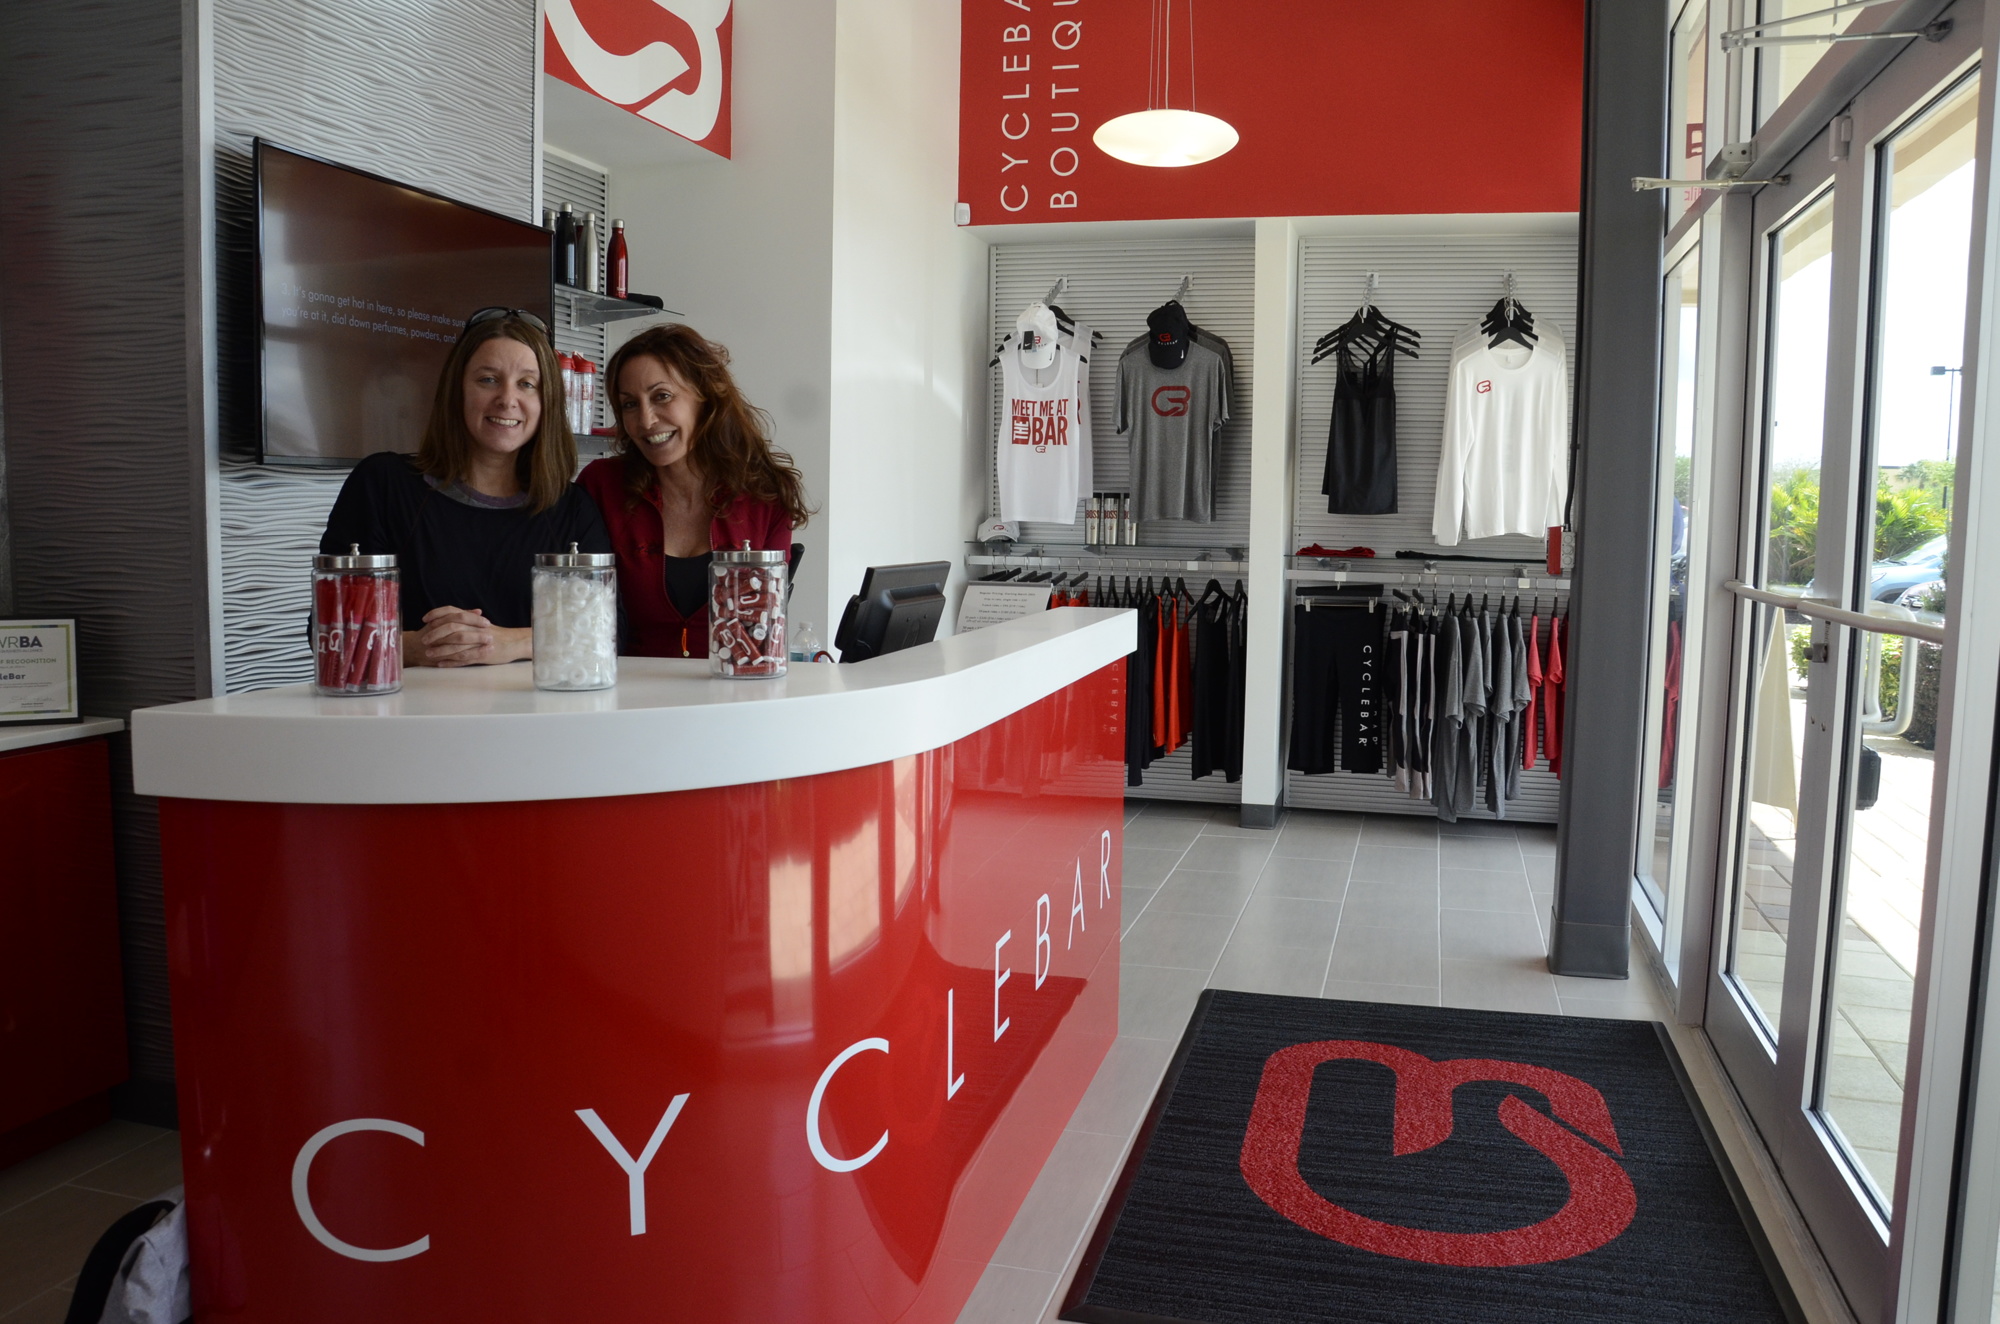 Annie Bernstein and Michelle Bennett of Ciclo Management, an Osprey-based company that brought CycleBar to Sarasota.